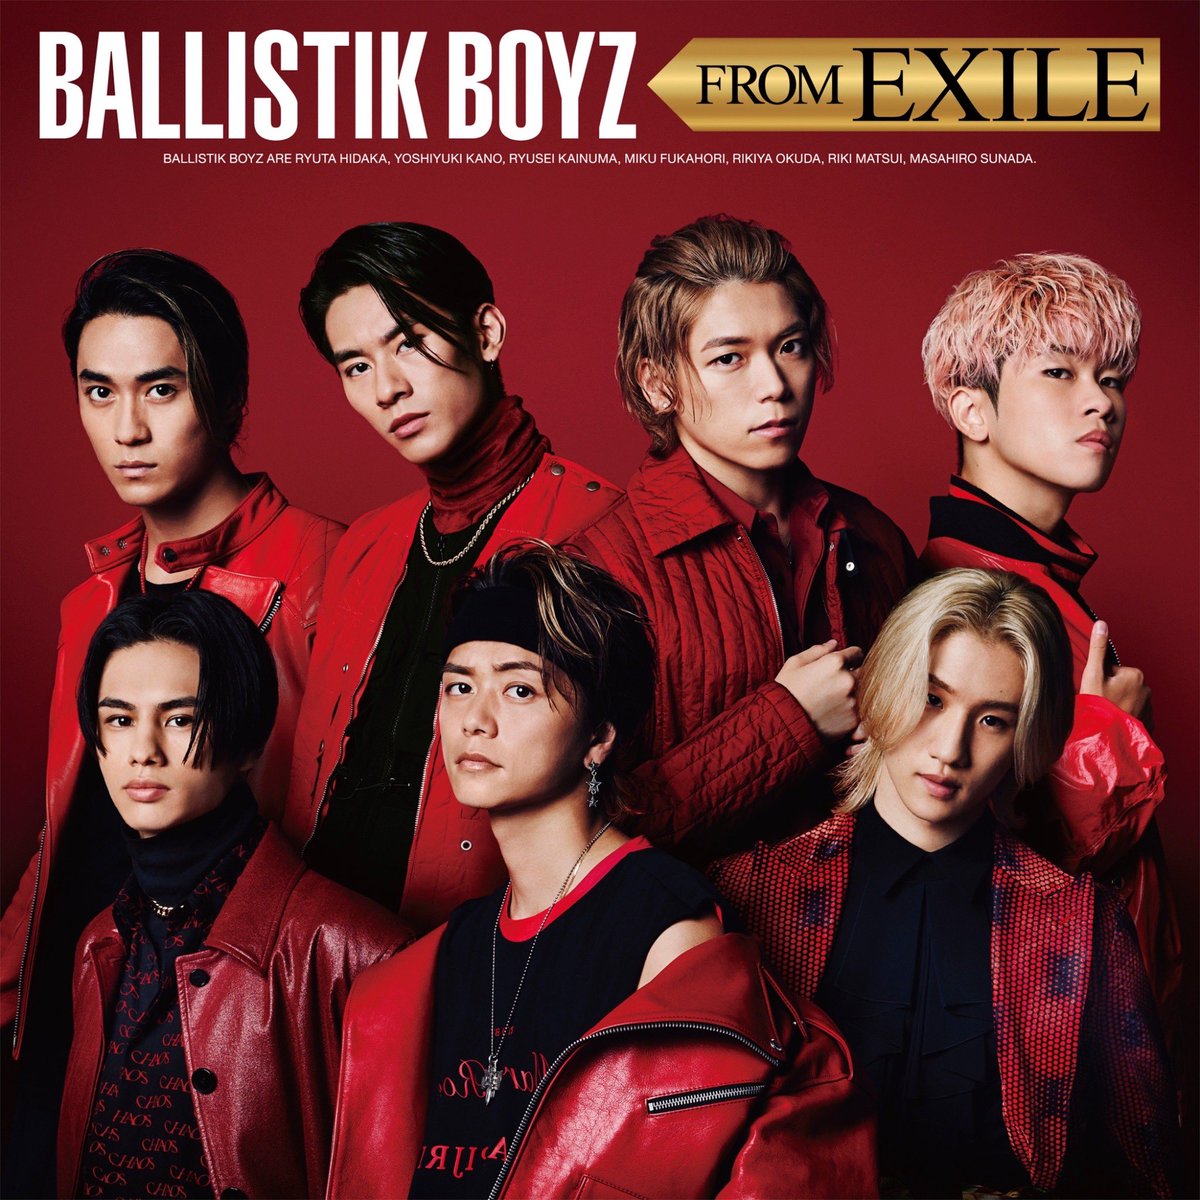 Cover art for『BALLISTIK BOYZ from EXILE TRIBE - Heads or Tails』from the release『BALLISTIK BOYZ FROM EXILE』